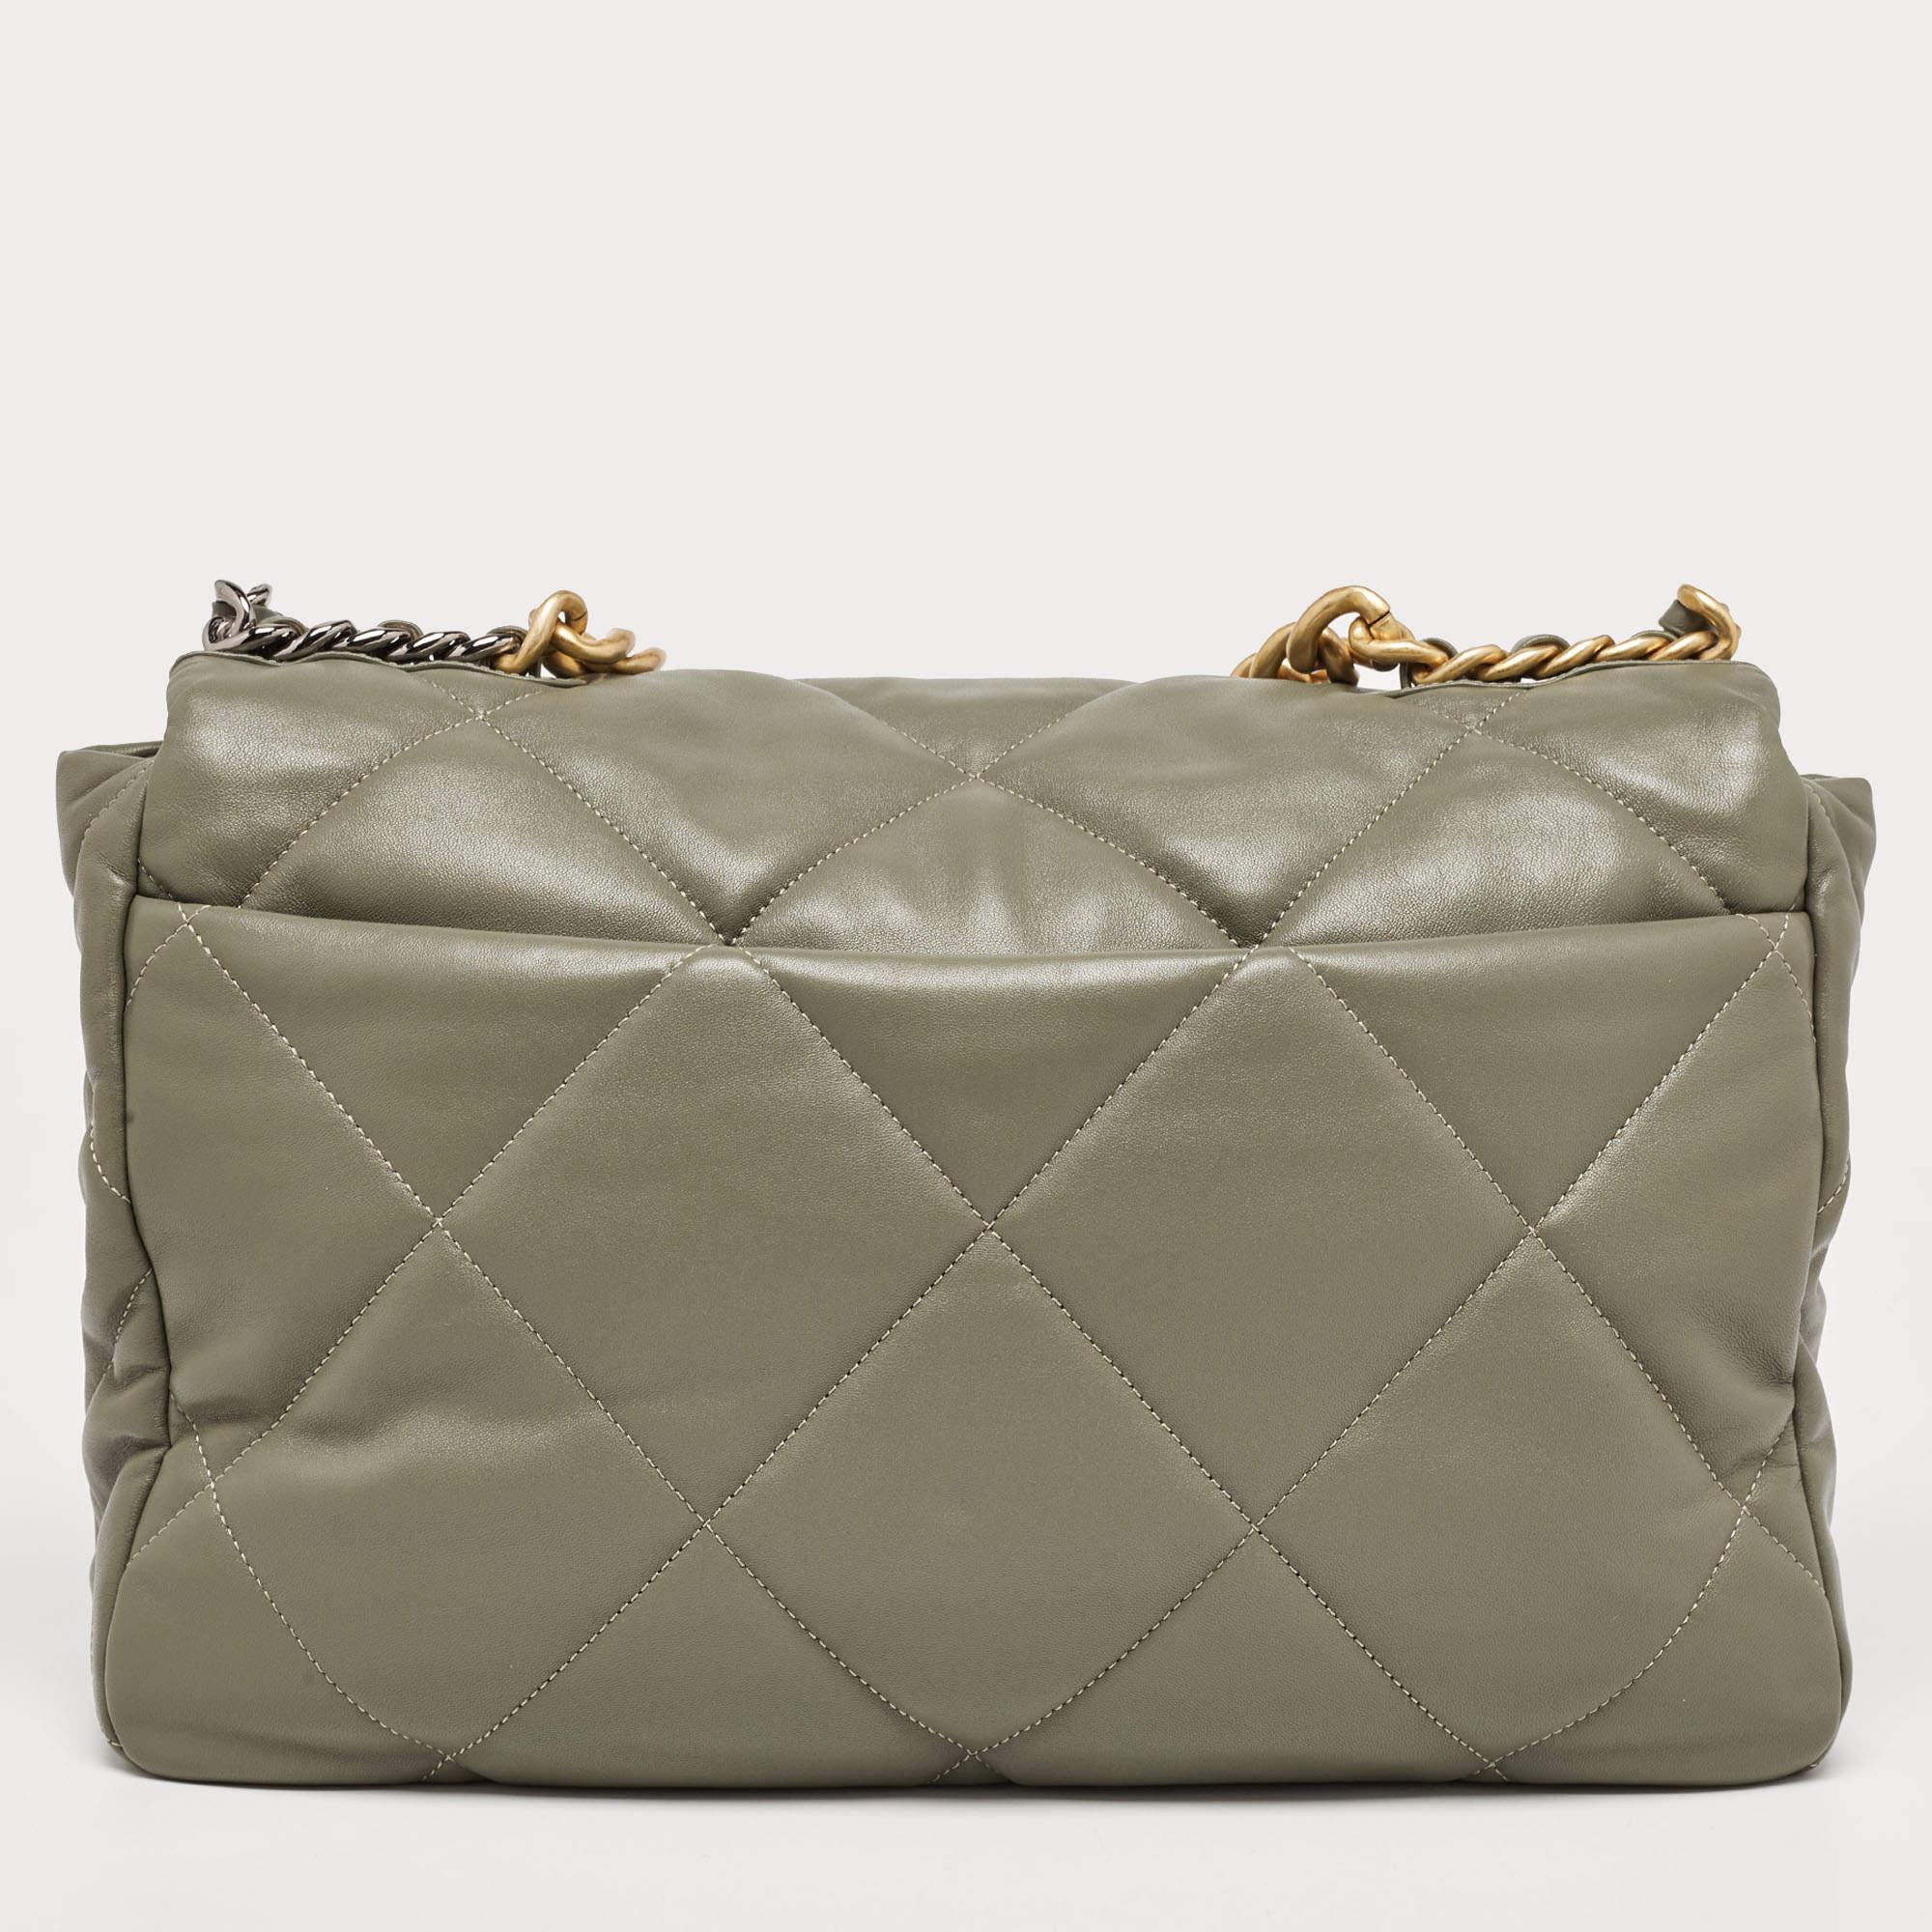 Chanel Fatigue Green Quilted Leather Maxi 19 Shoulder Bag 5